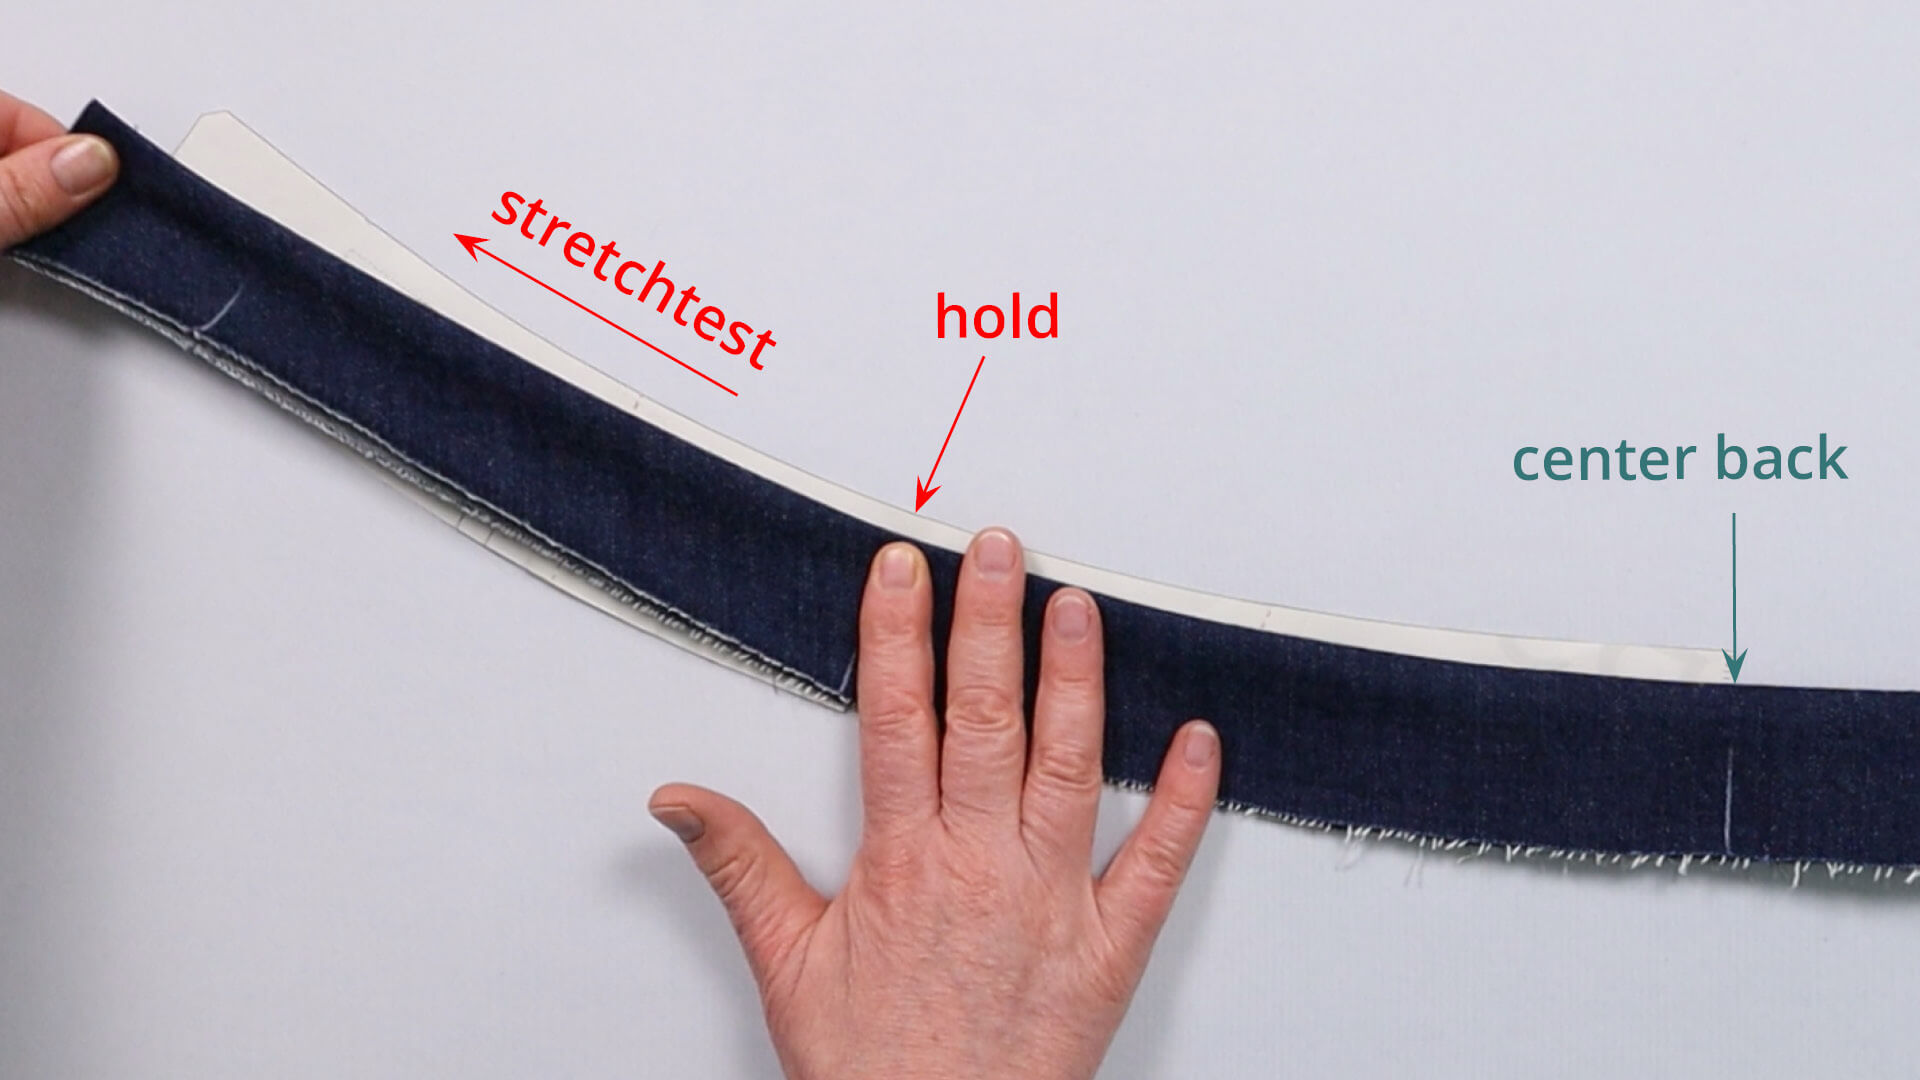 Stretch test in the front area of the shaped waistband after sewing the upper edge of the waistband